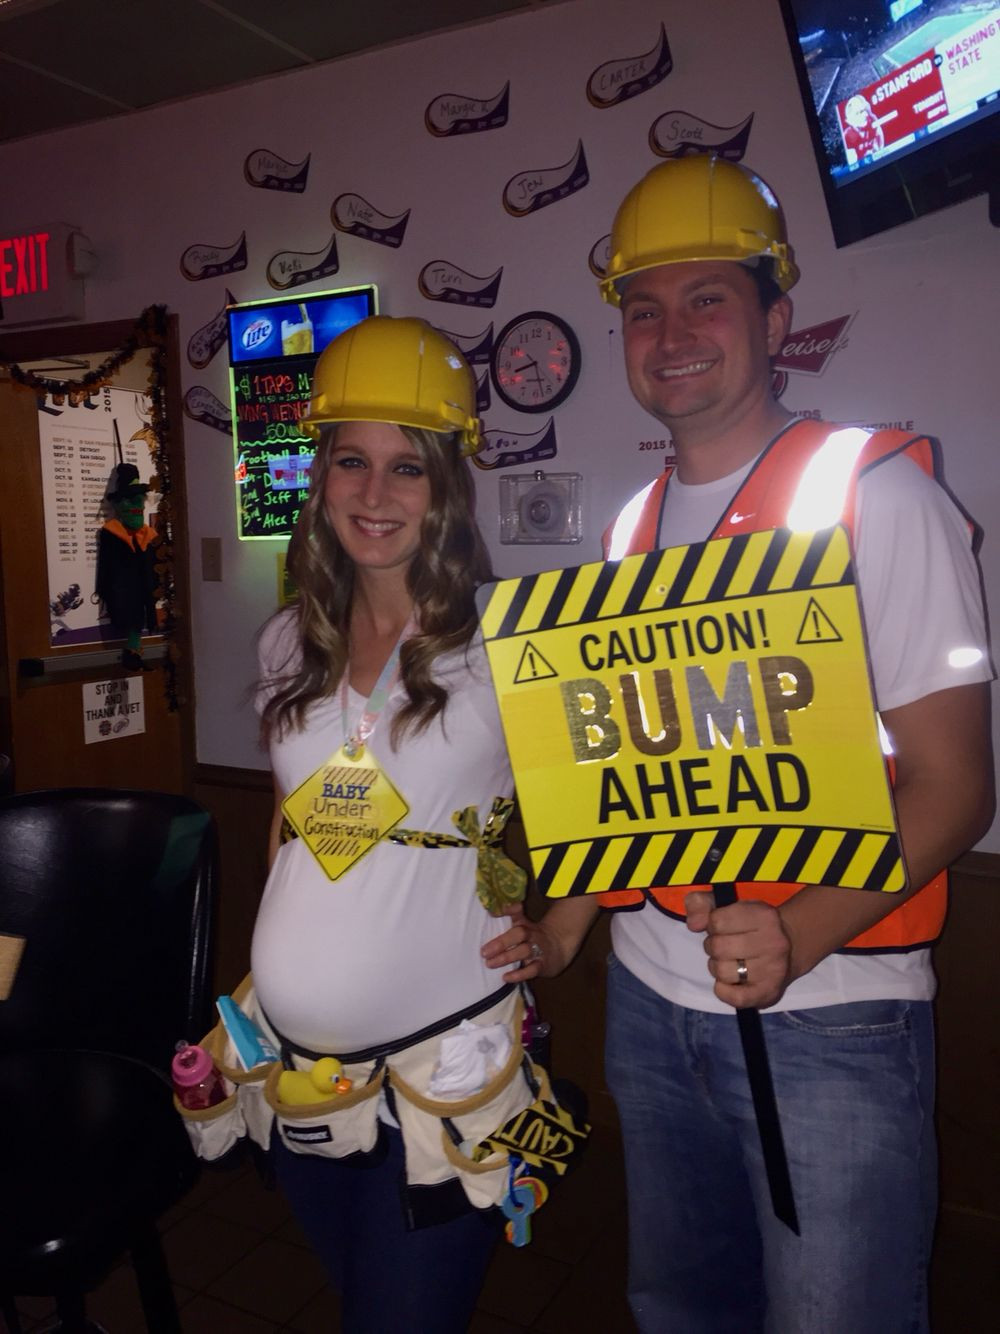 Construction Worker Costume DIY
 Pregnant Construction Worker couples Halloween costume